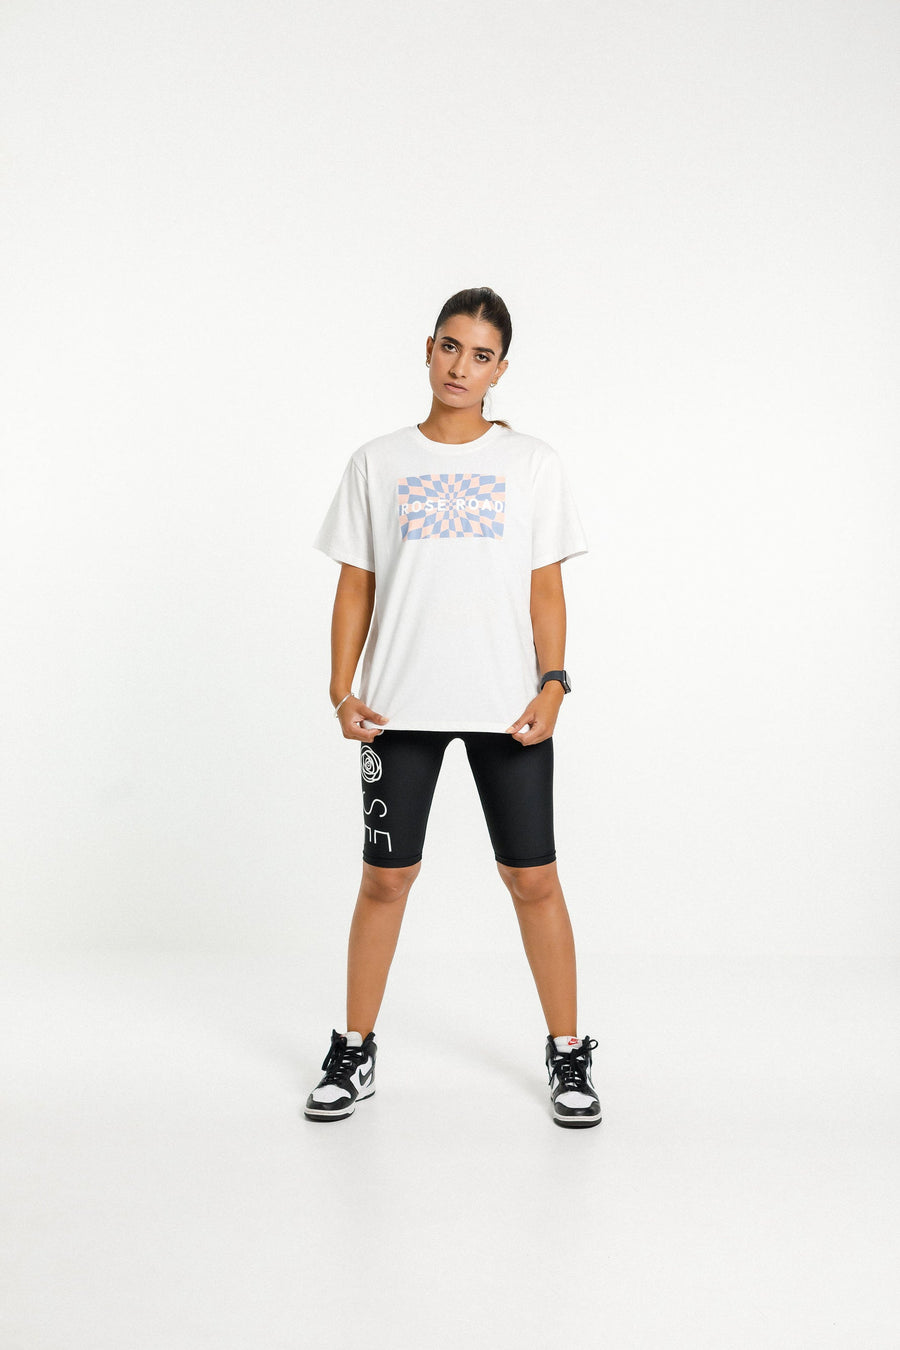 ROSE ROAD TOPHER TEE - WHITE TROPICAL CHECK - WILD ROSE